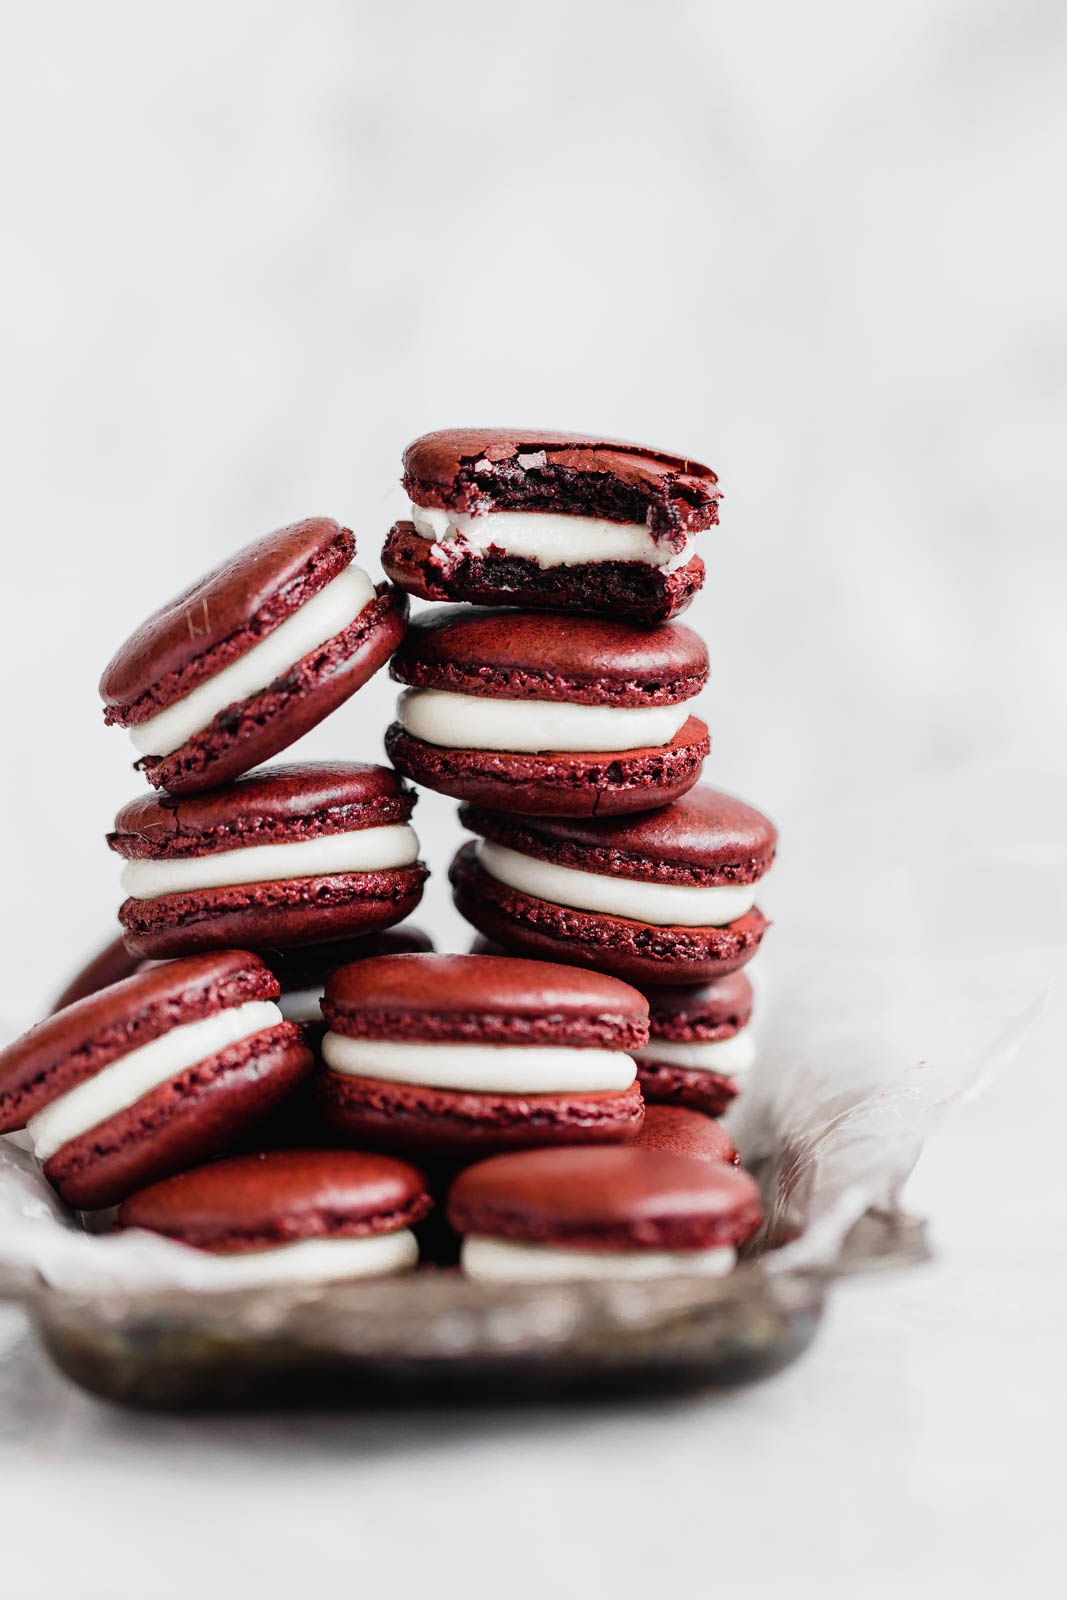 Decadent Red Velvet Macarons with a cream cheese frosting. Perfect for the holiday season, or just because!